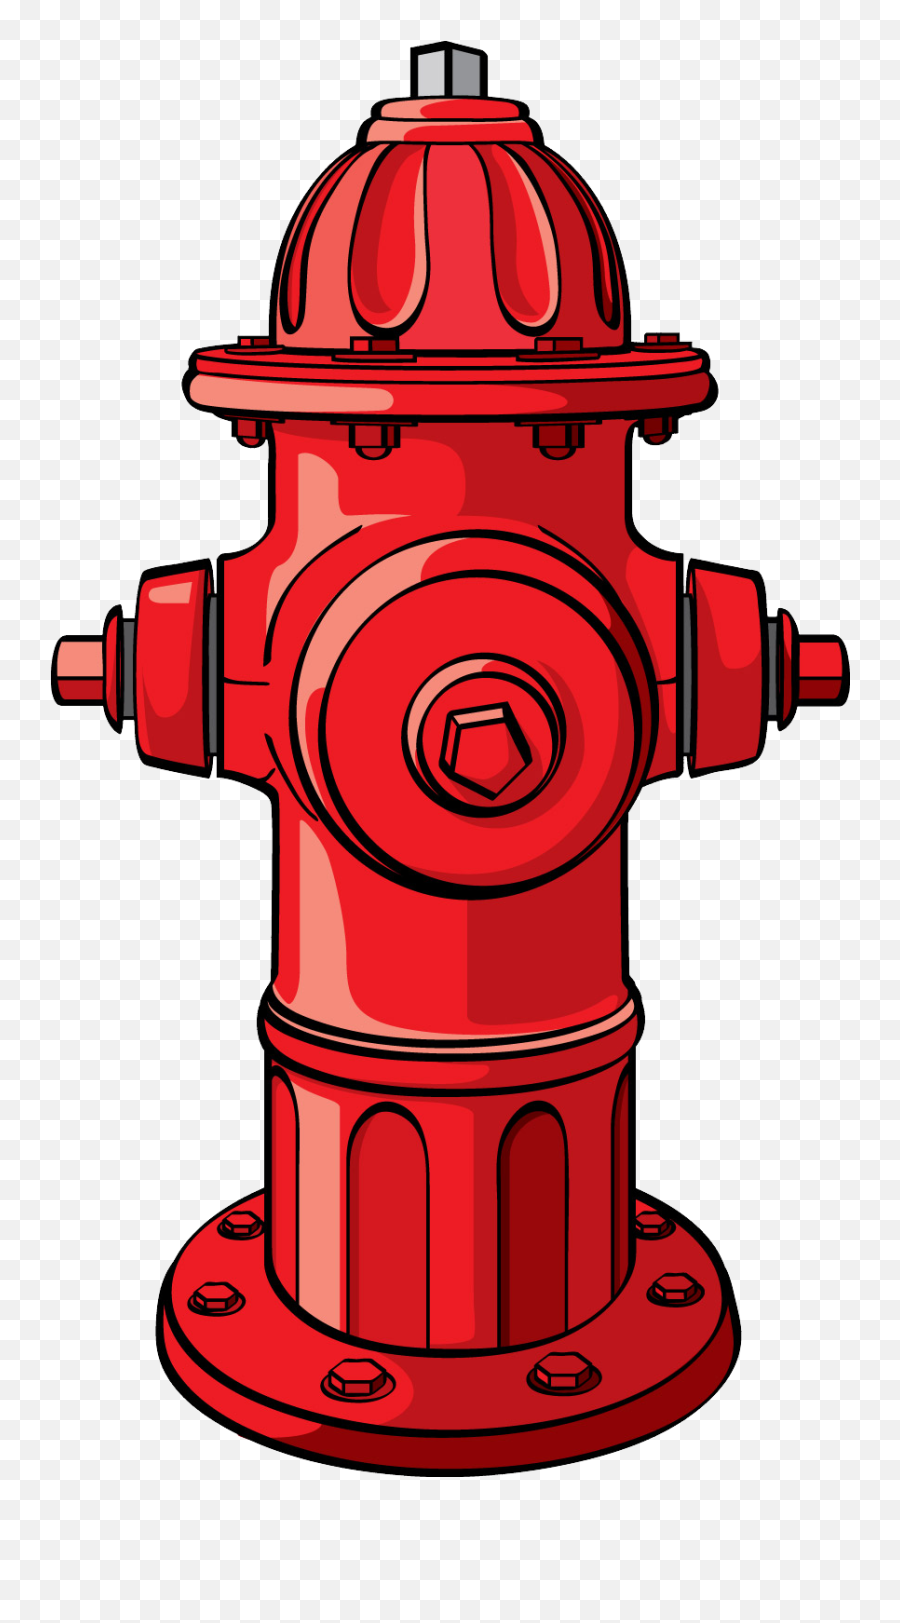 Download Fire Hydrant Png Image For Free - Fire Hydrant Clipart,Fire On Transparent Background